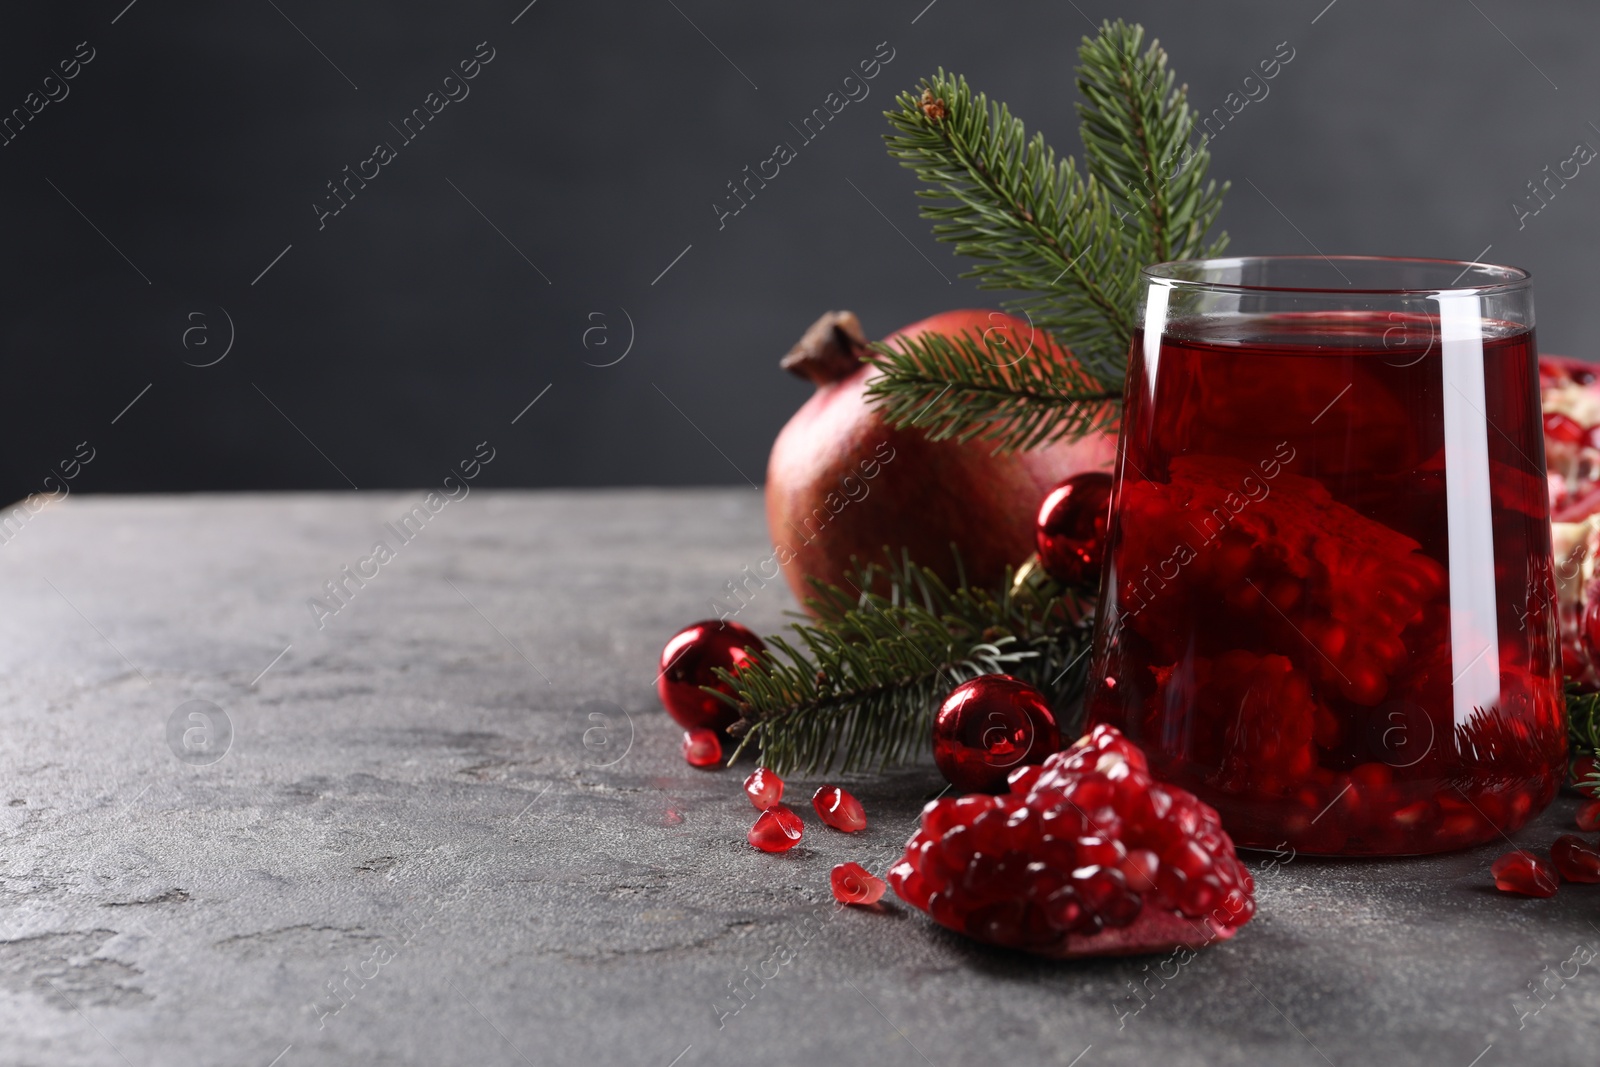 Photo of Aromatic Sangria drink in glass, Christmas decor and pomegranate grains on grey textured table, space for text